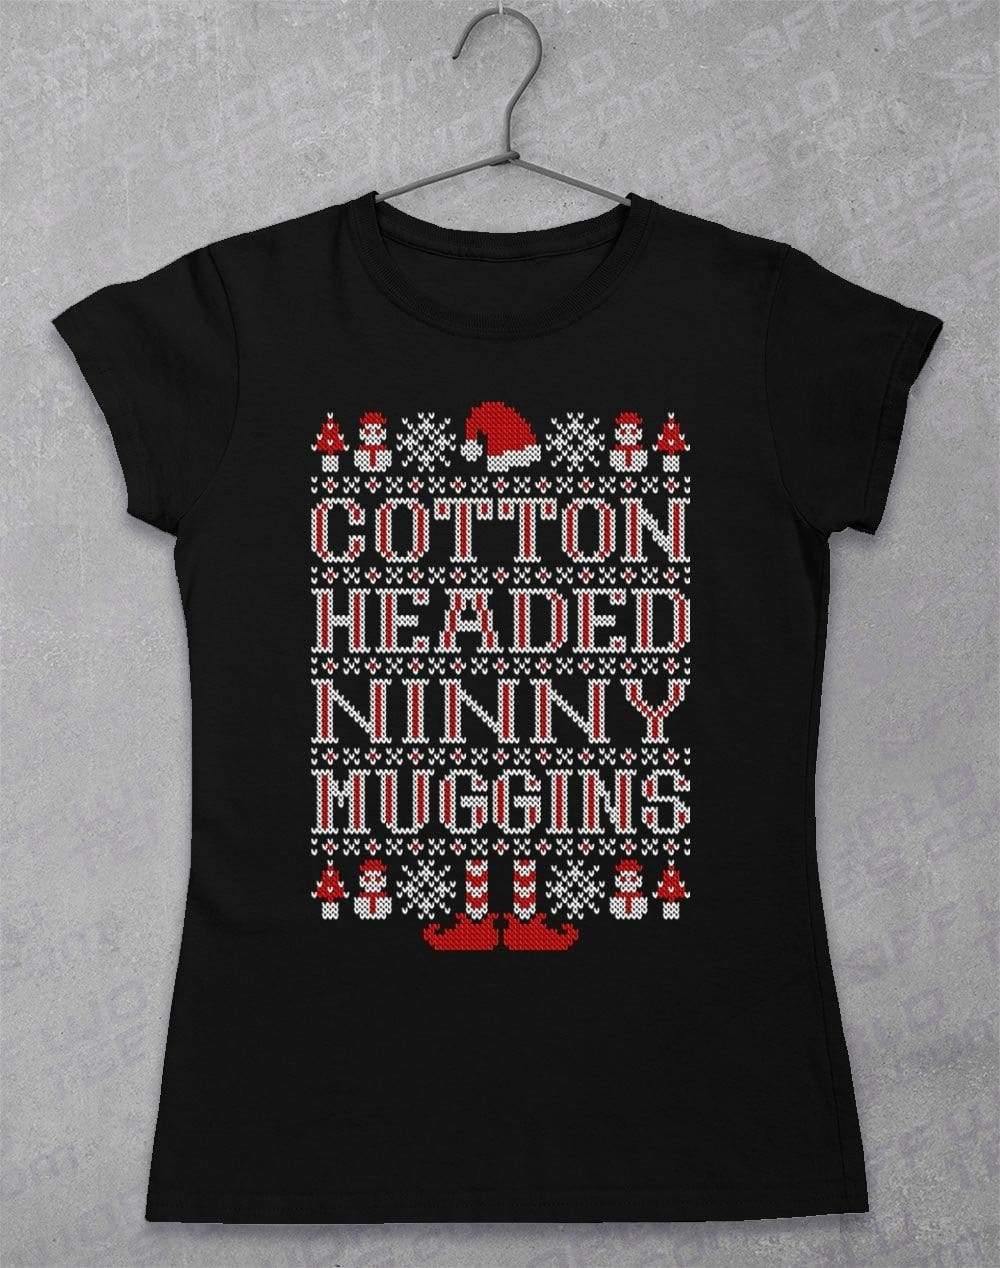 Cotton Headed Ninny Muggins Festive Knitted-Look Women's T-Shirt 8-10 / Black  - Off World Tees